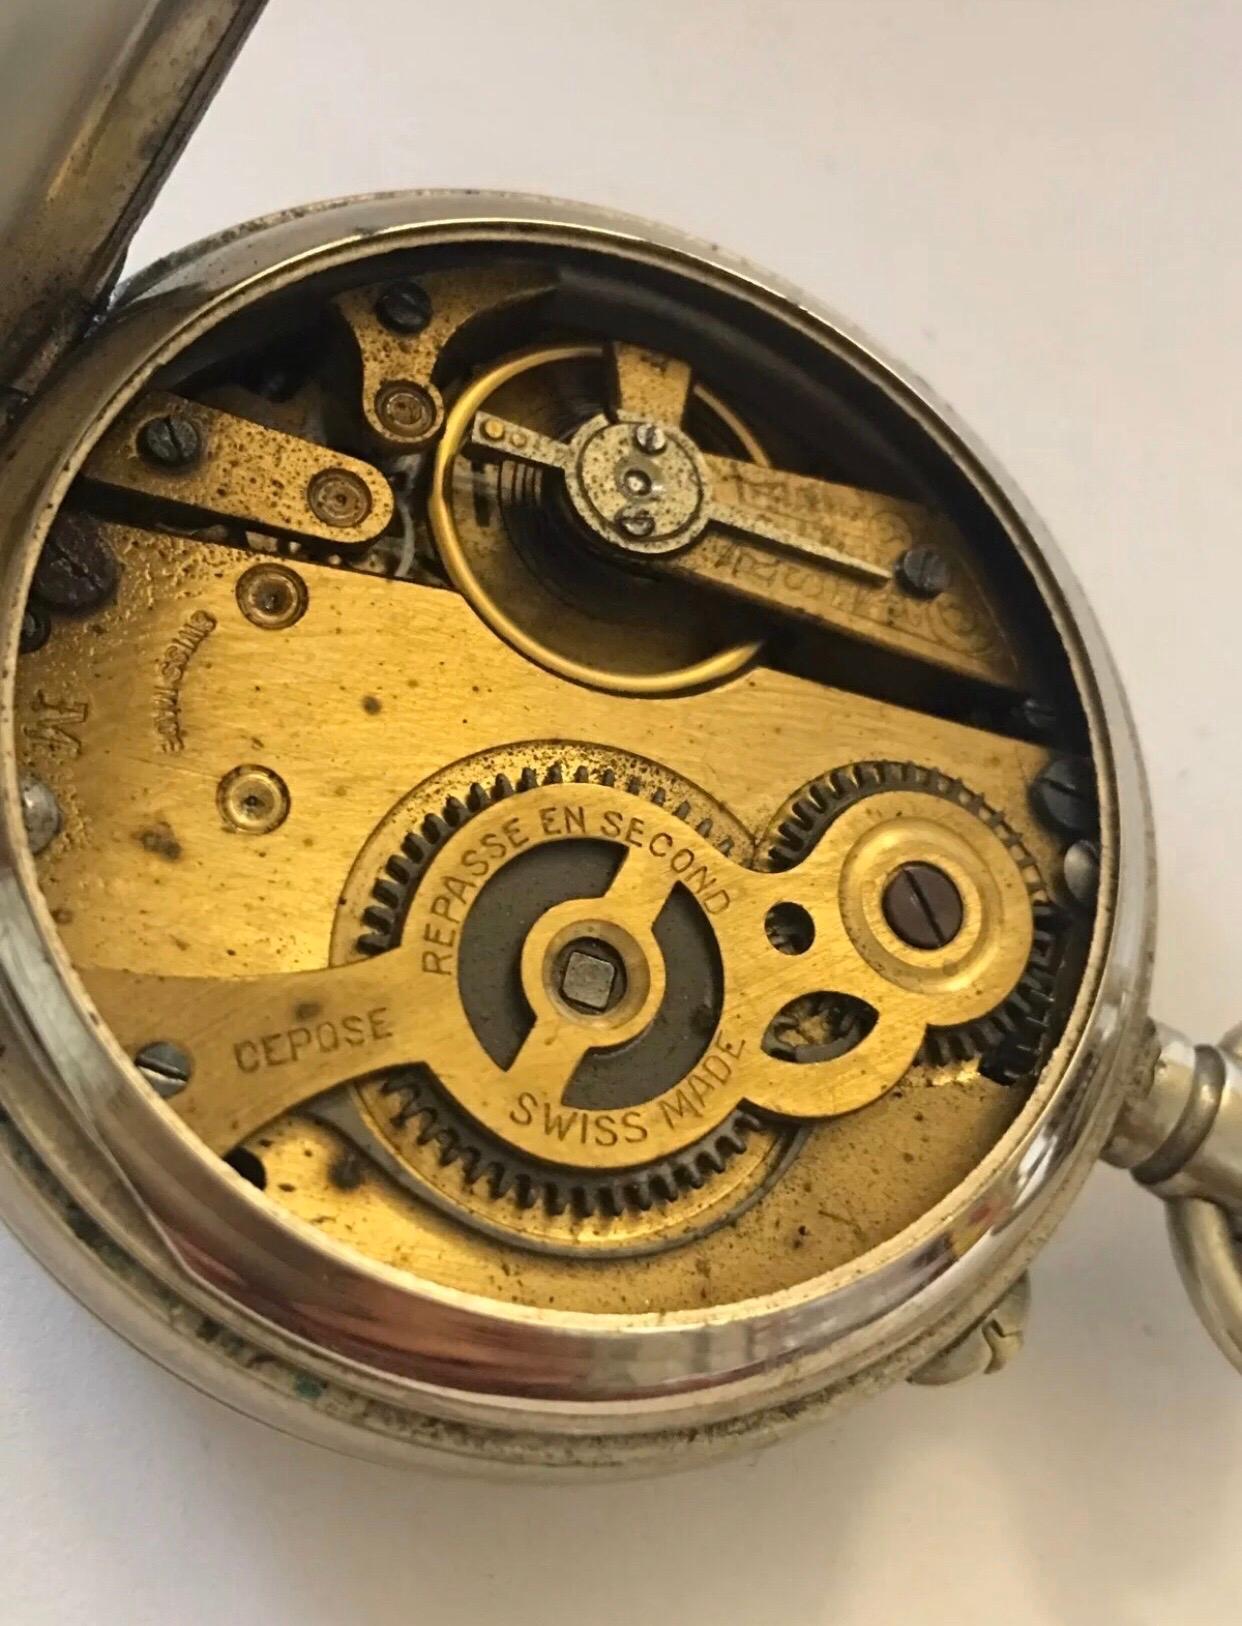 
Antique Swiss Made Pocket Watch. This watch is working and ticking nicely. Non magnetic lever. 
Please study the images carefully carefully as form part of the description.